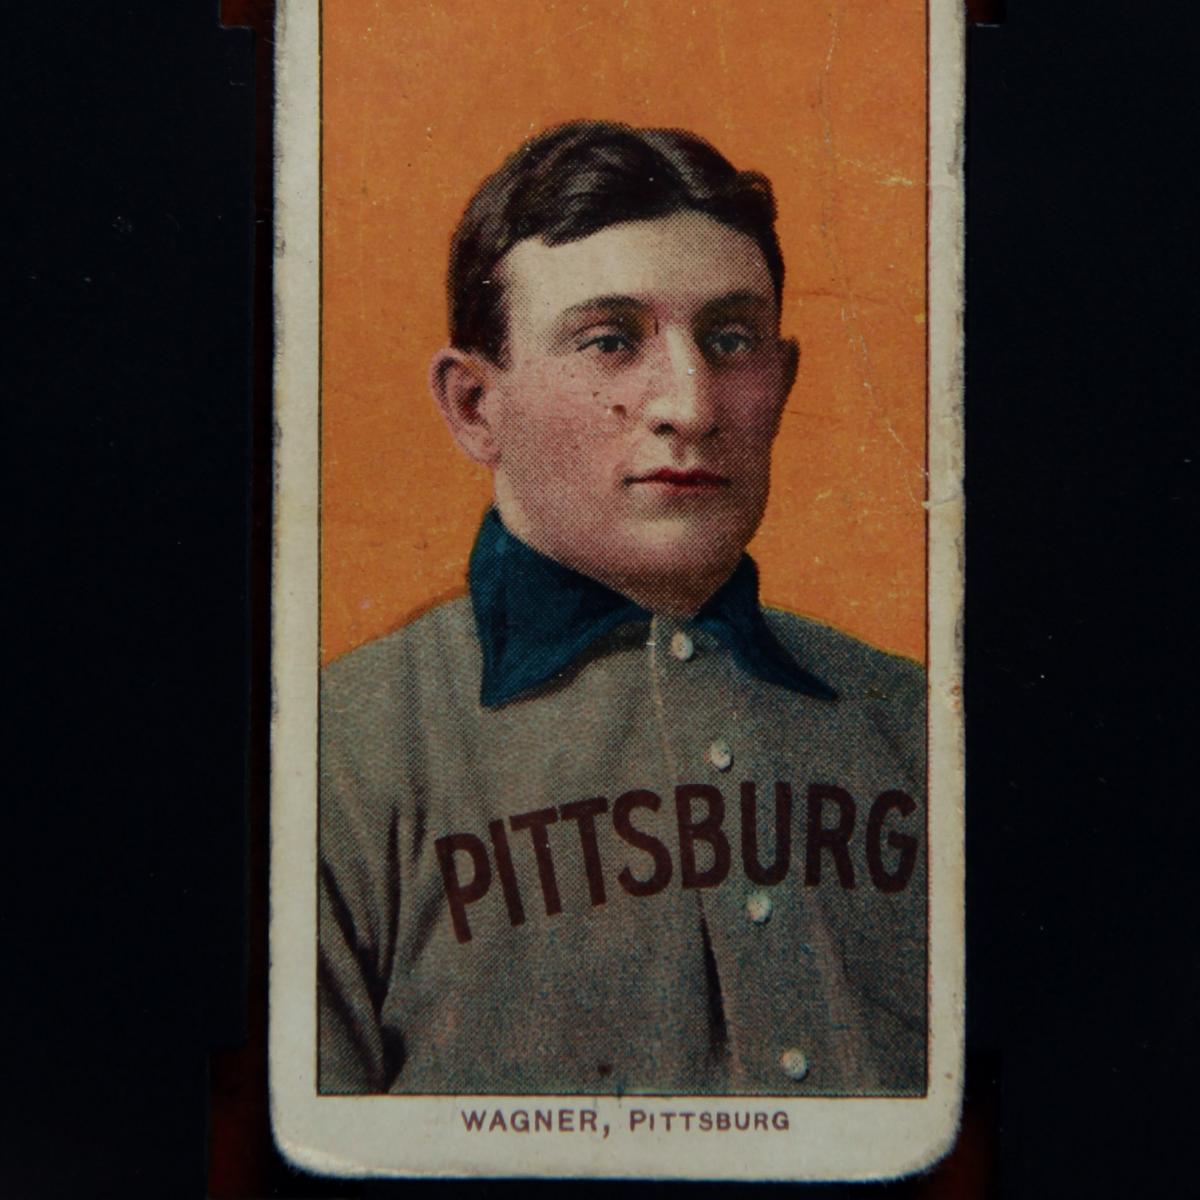 Ultra-Uncommon Honus Wagner T206 Card Up for Auction, Opening Remark Listed at $1M